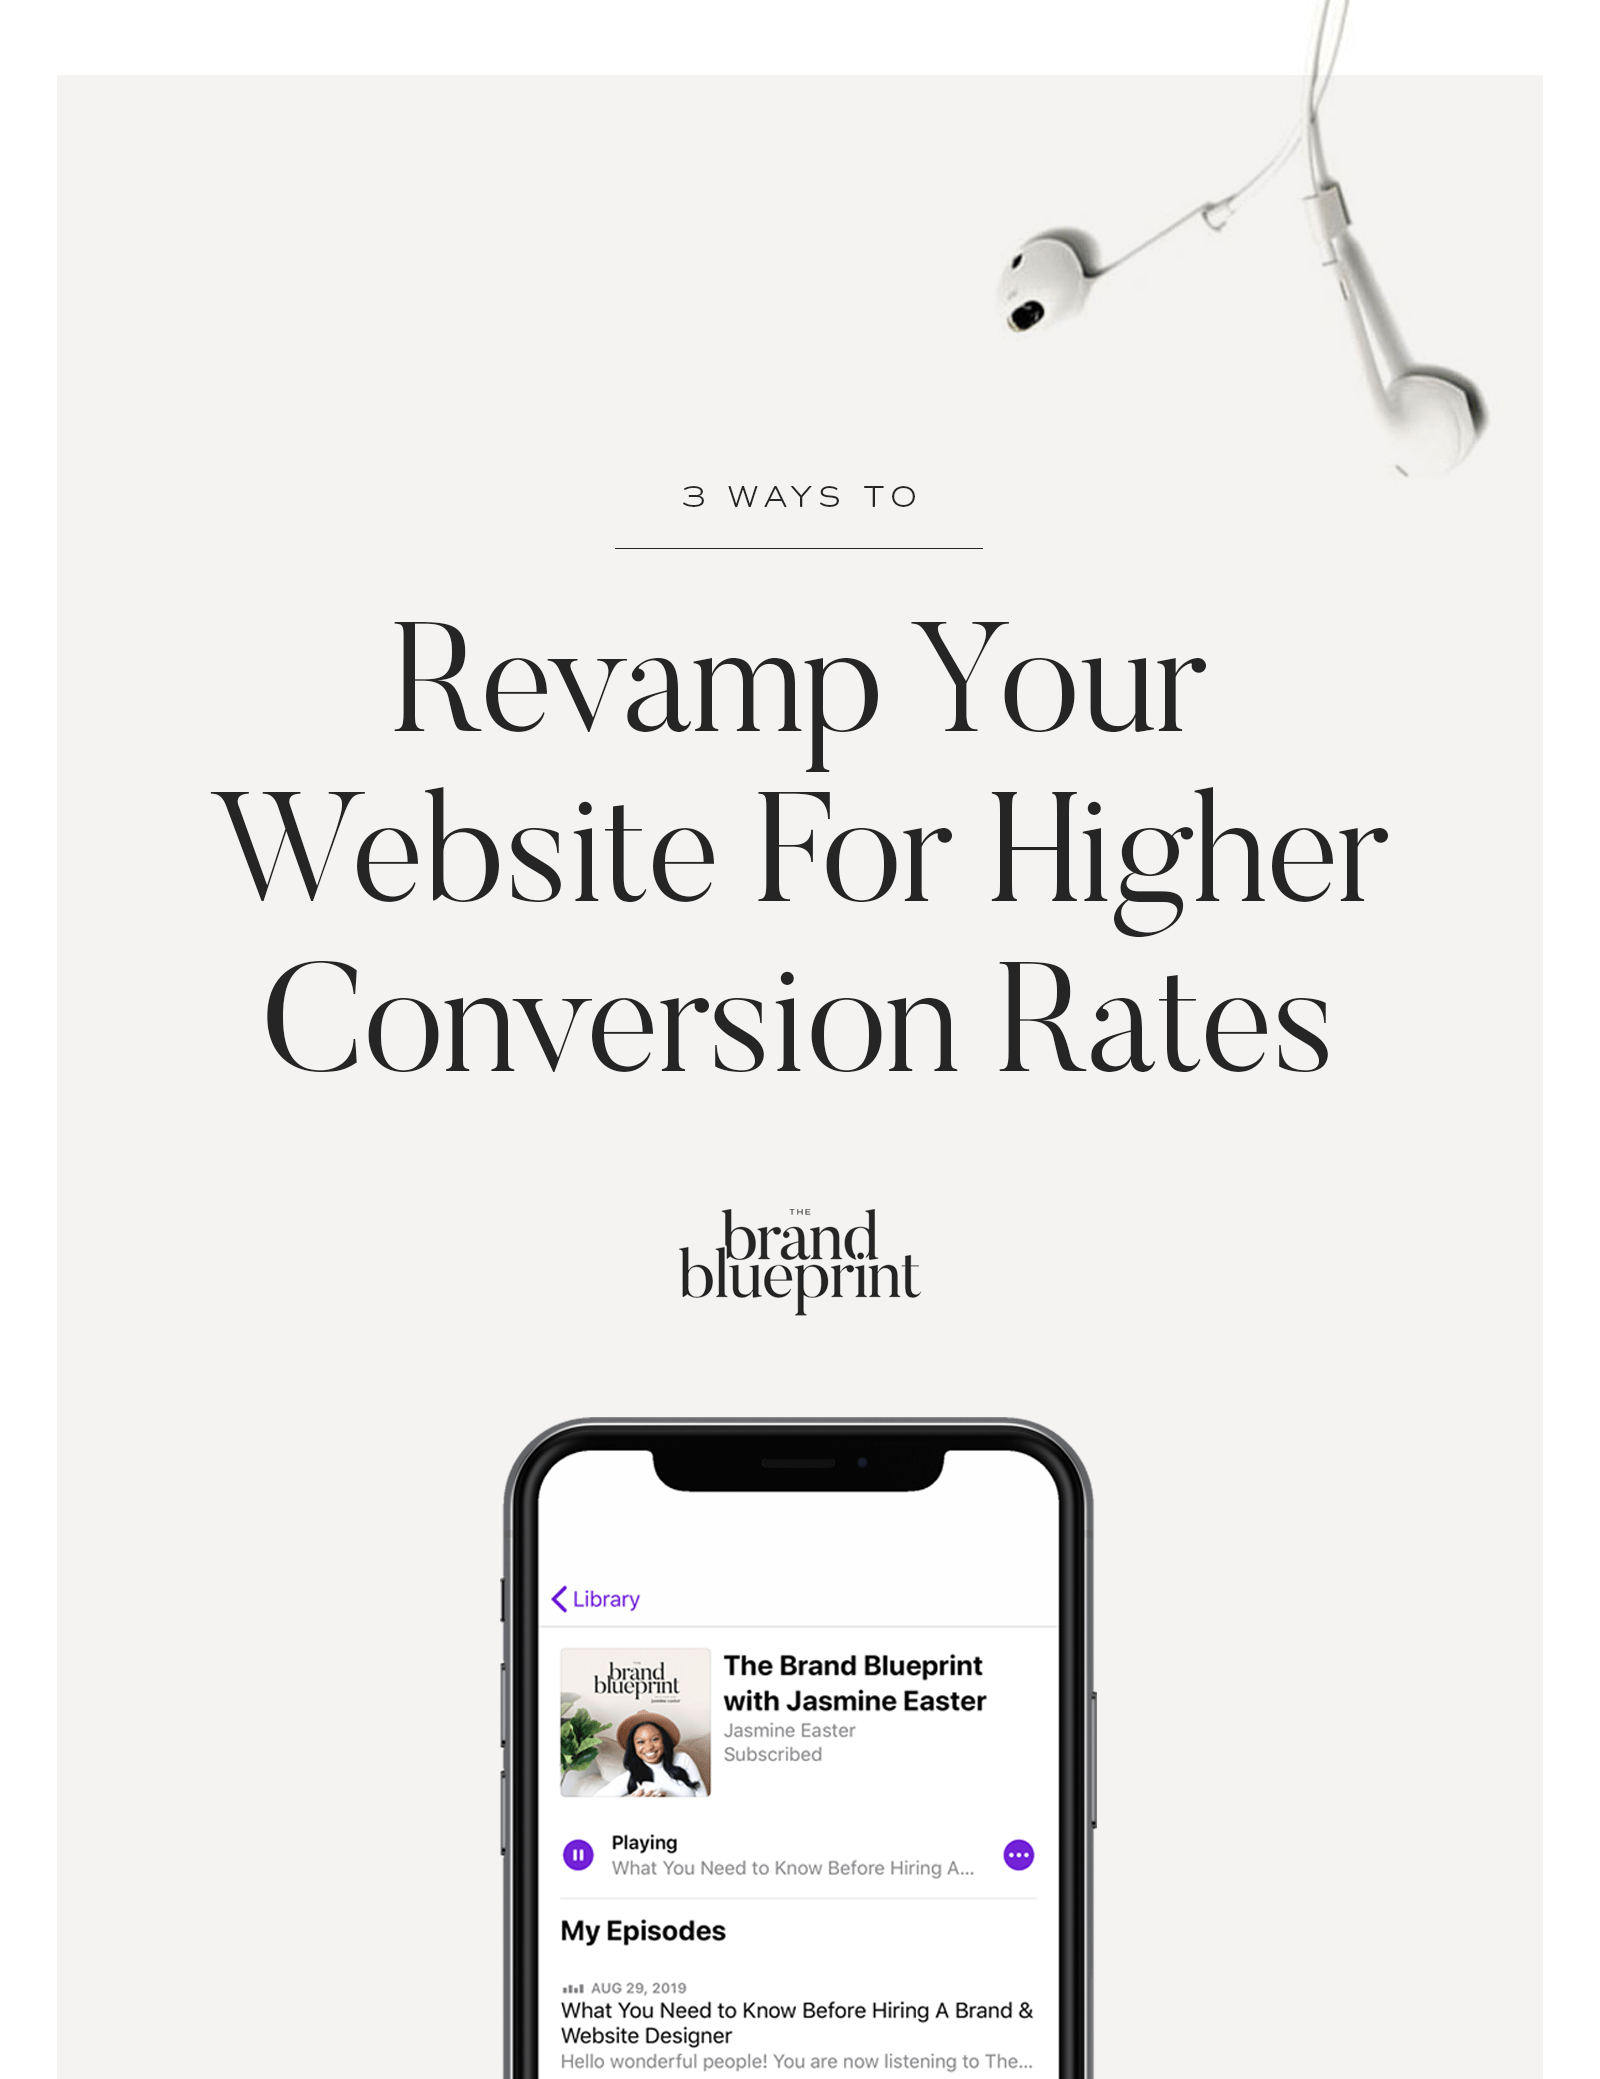 3 Ways To Revamp Your Website For Higher Conversion Rates